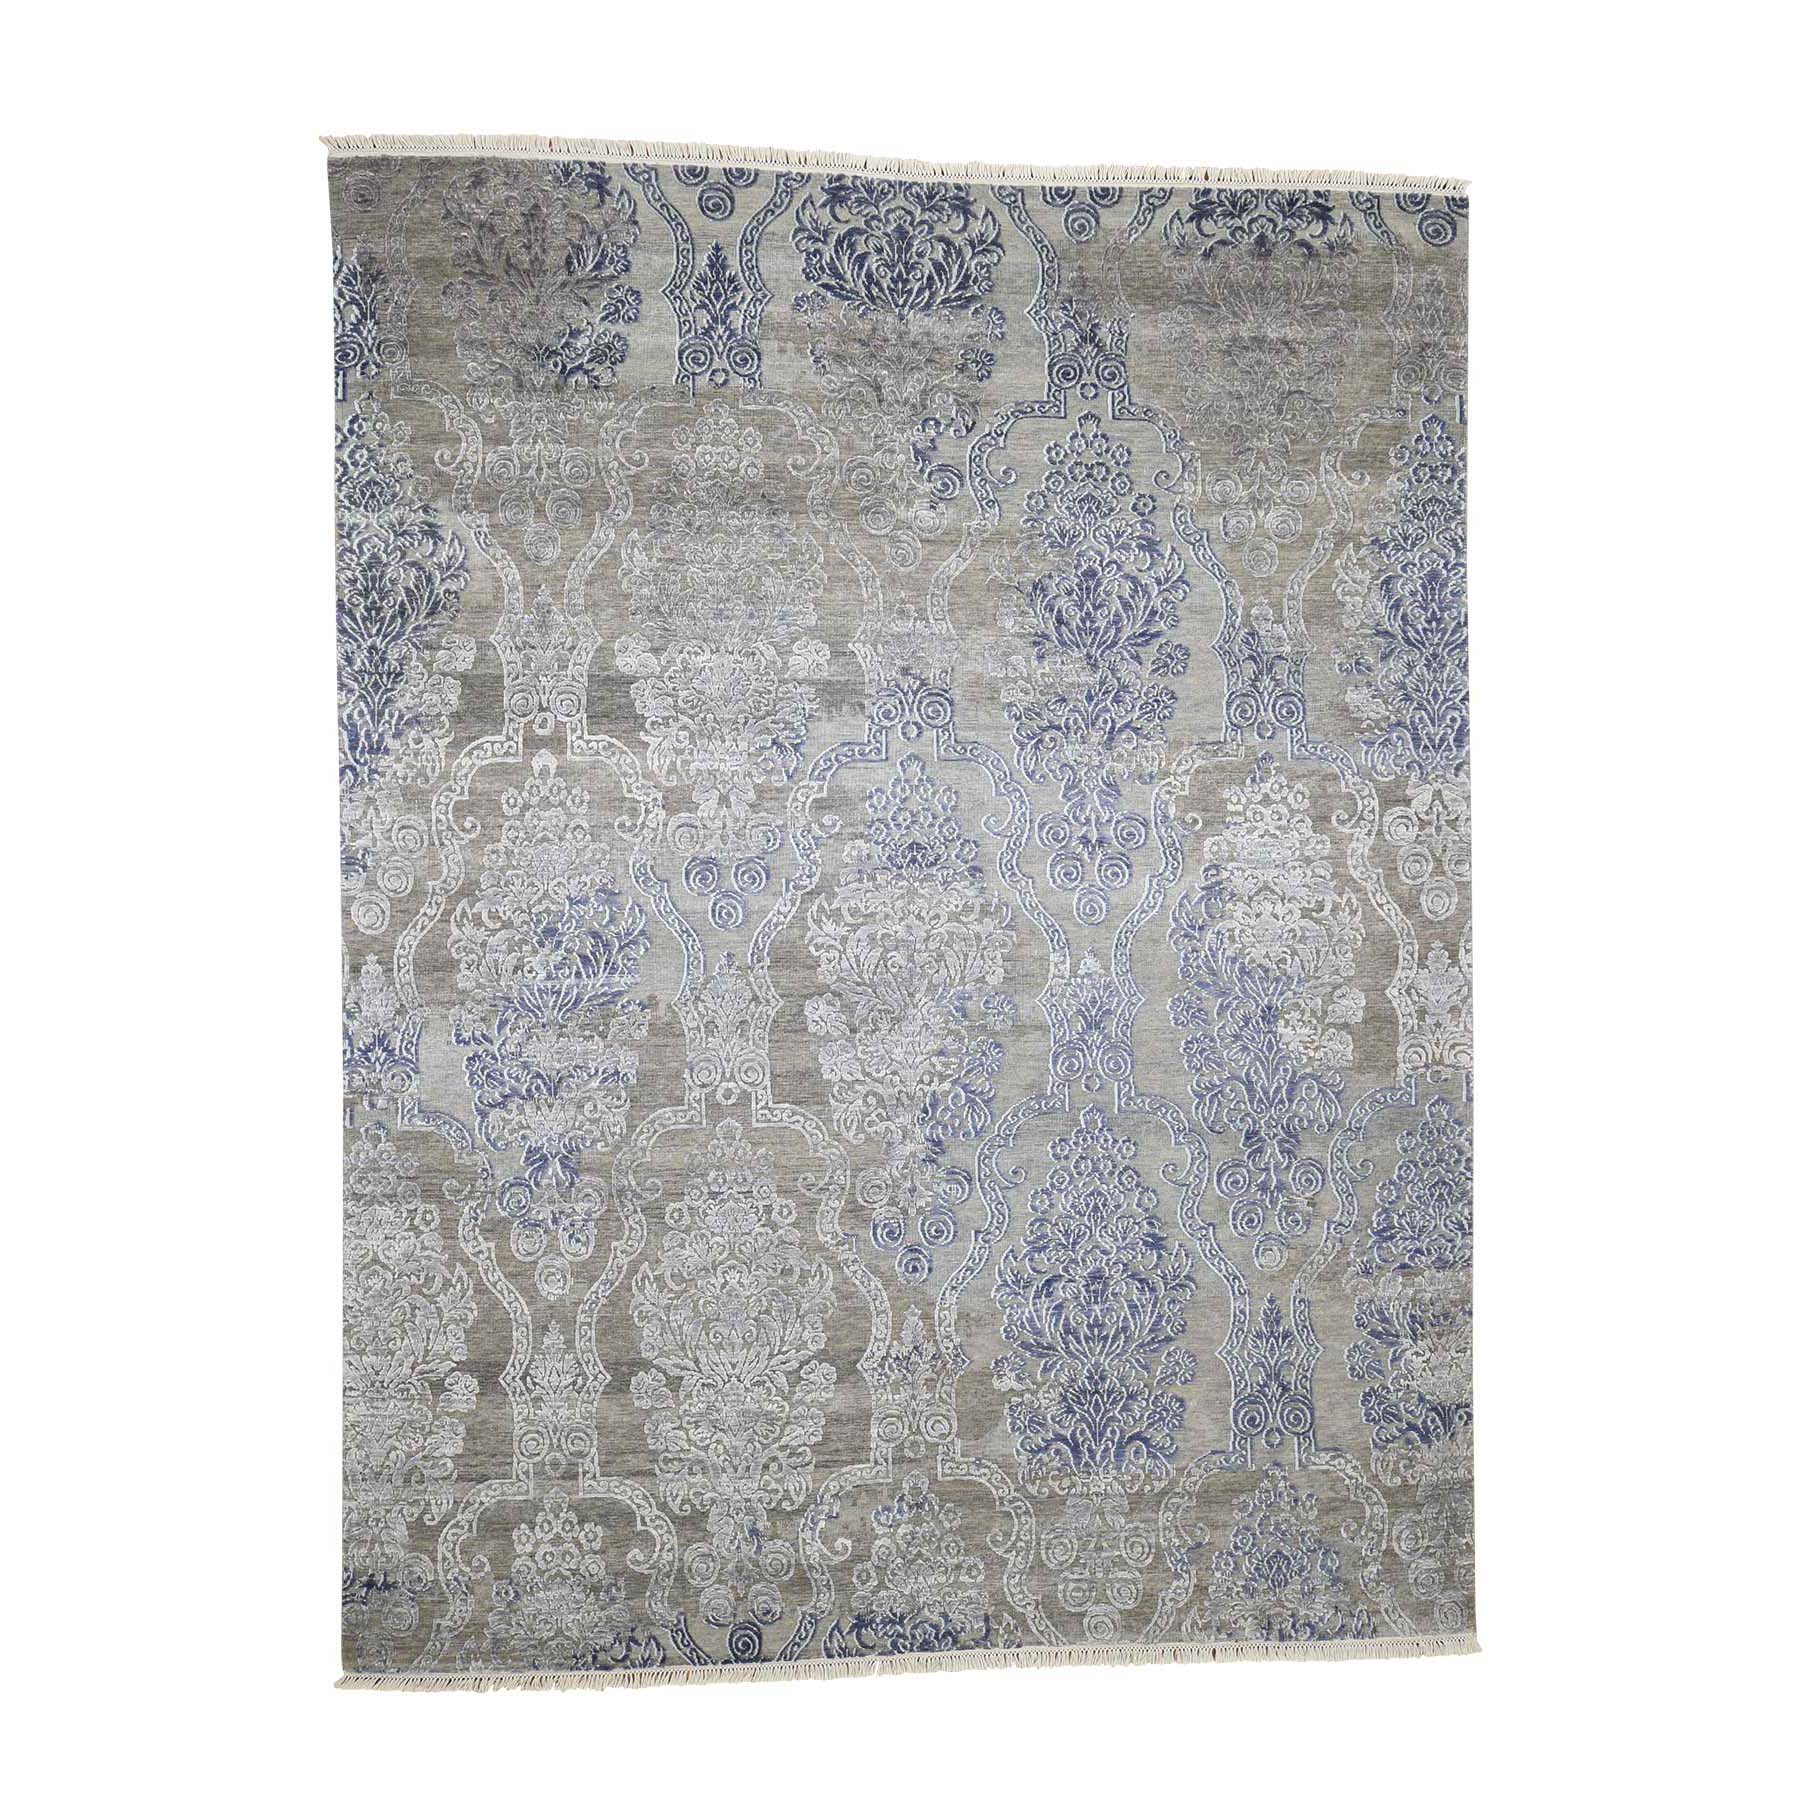 8'x10'4" Silk with Textured Wool Hand Woven Transitional Rug 